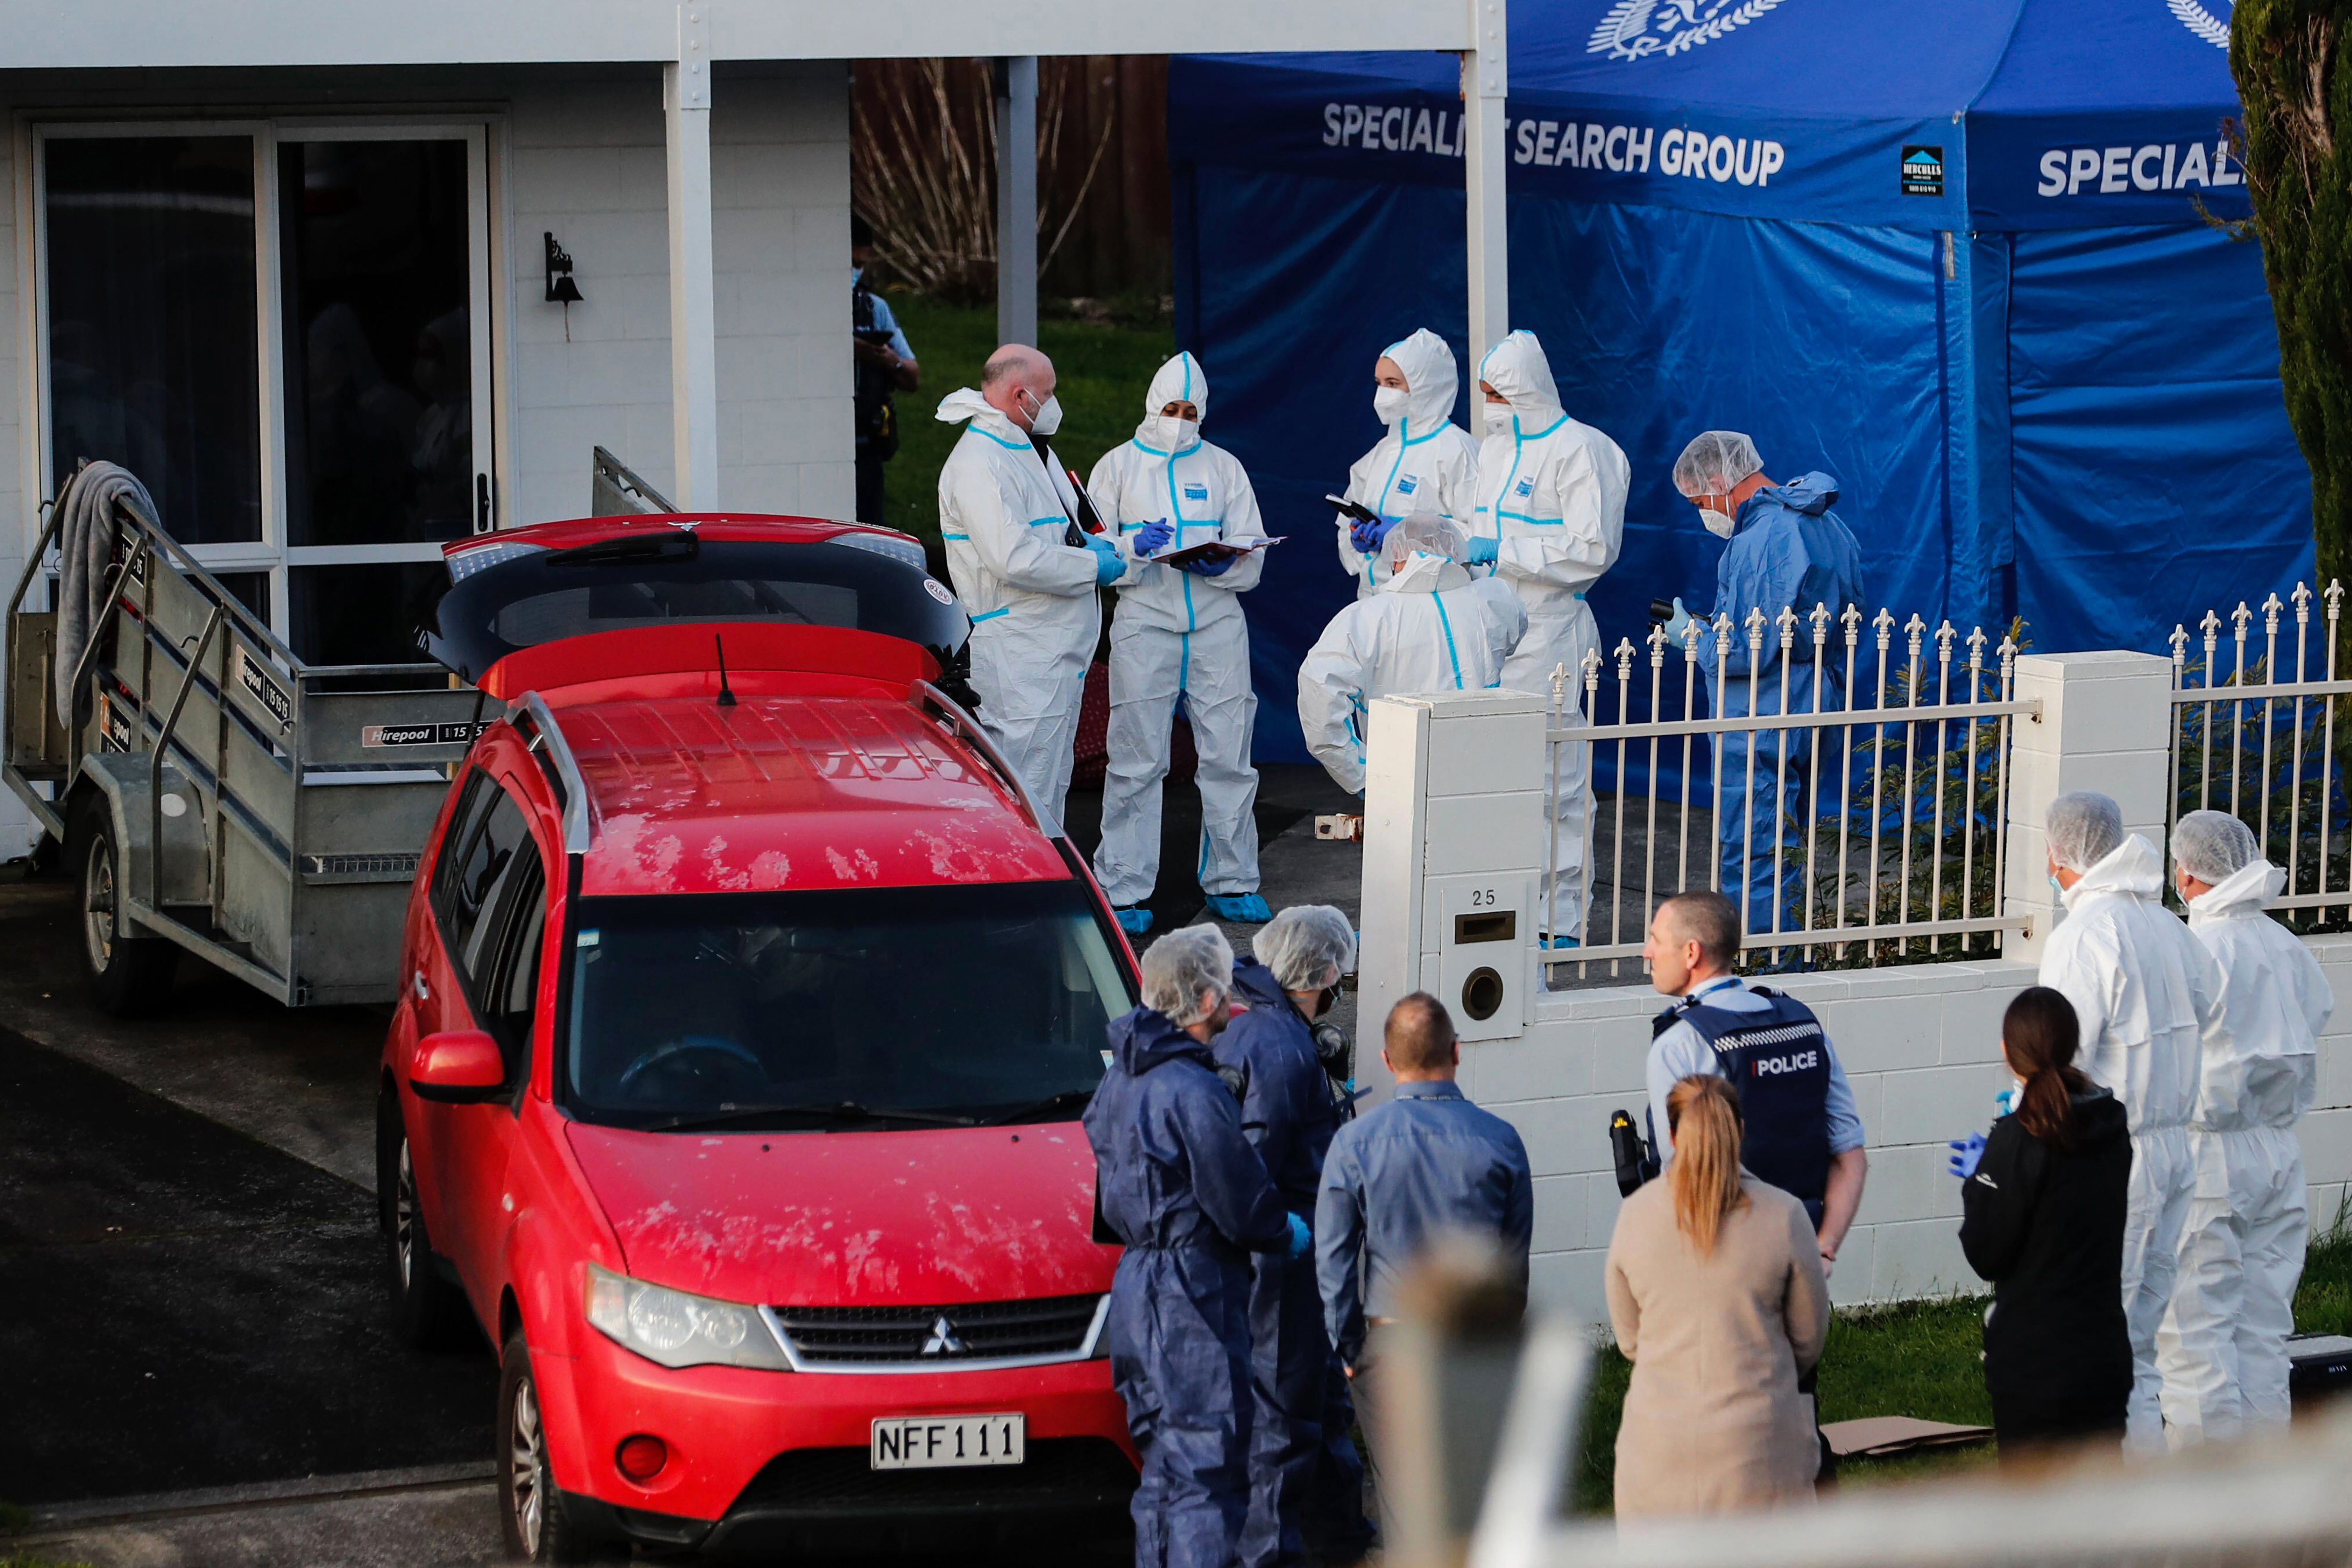 New Zealand police investigators work at a scene in Auckland on Aug. 11, 2022, after bodies were discovered in suitcases